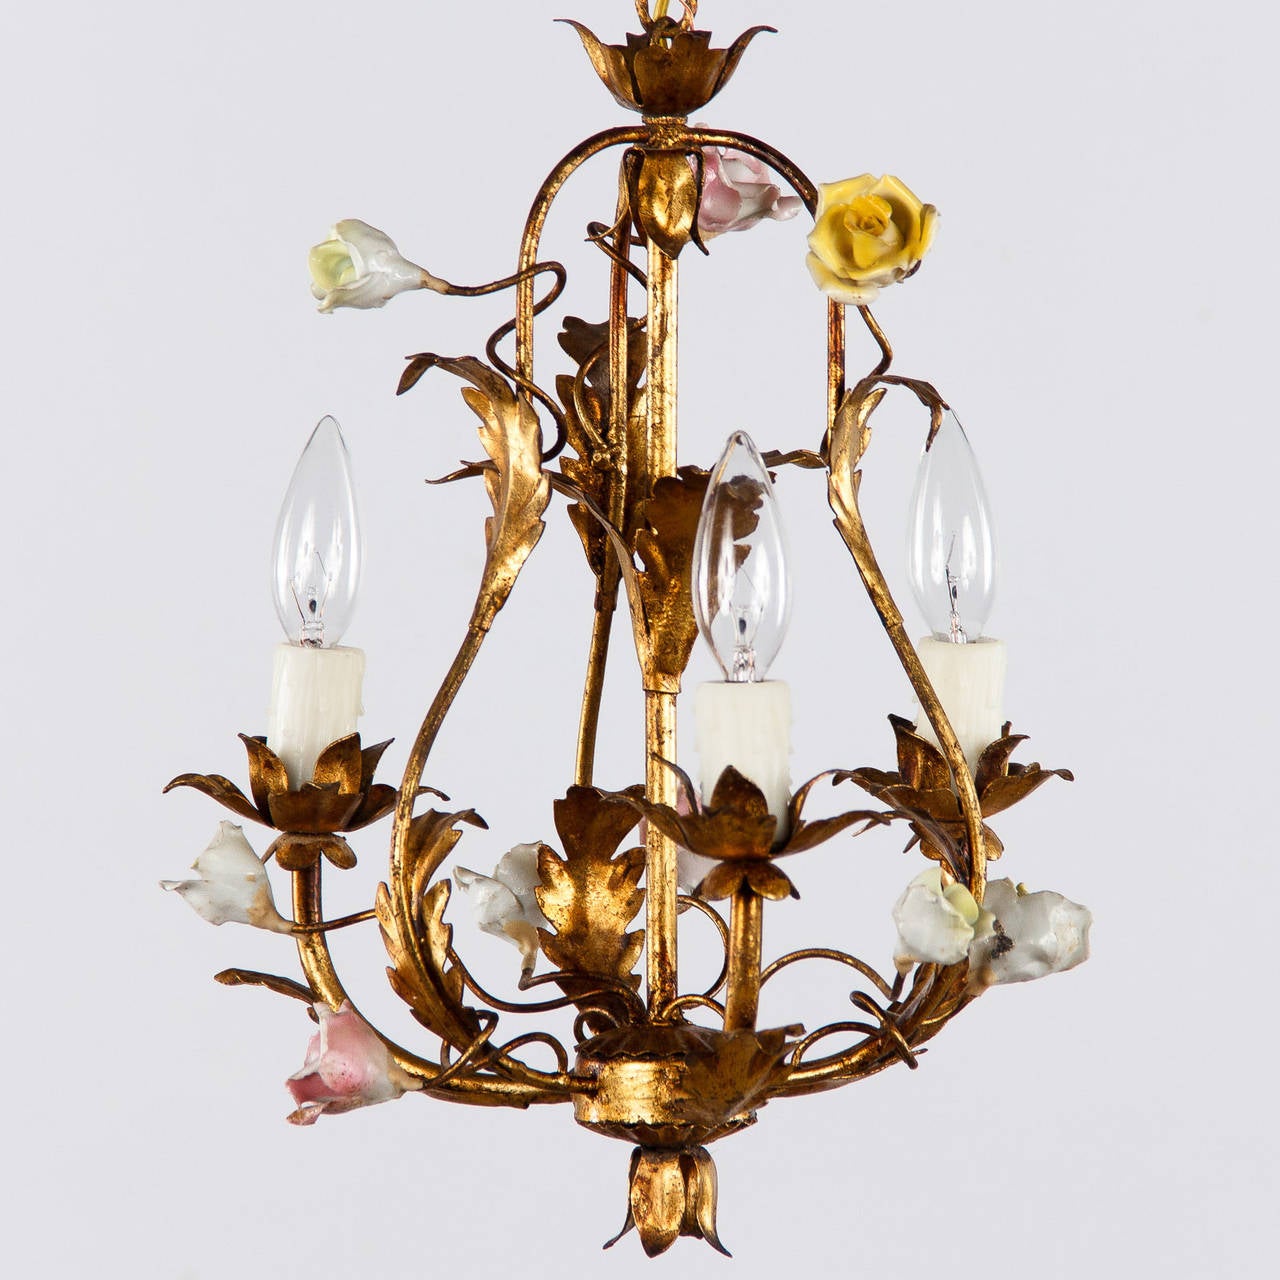 A romantic small Chandelier made of gilded tole with leaf motifs and porcelain roses. The fixture is housing 3 small socket bulbs up to 60w. each. The chain and canopy add 12.5